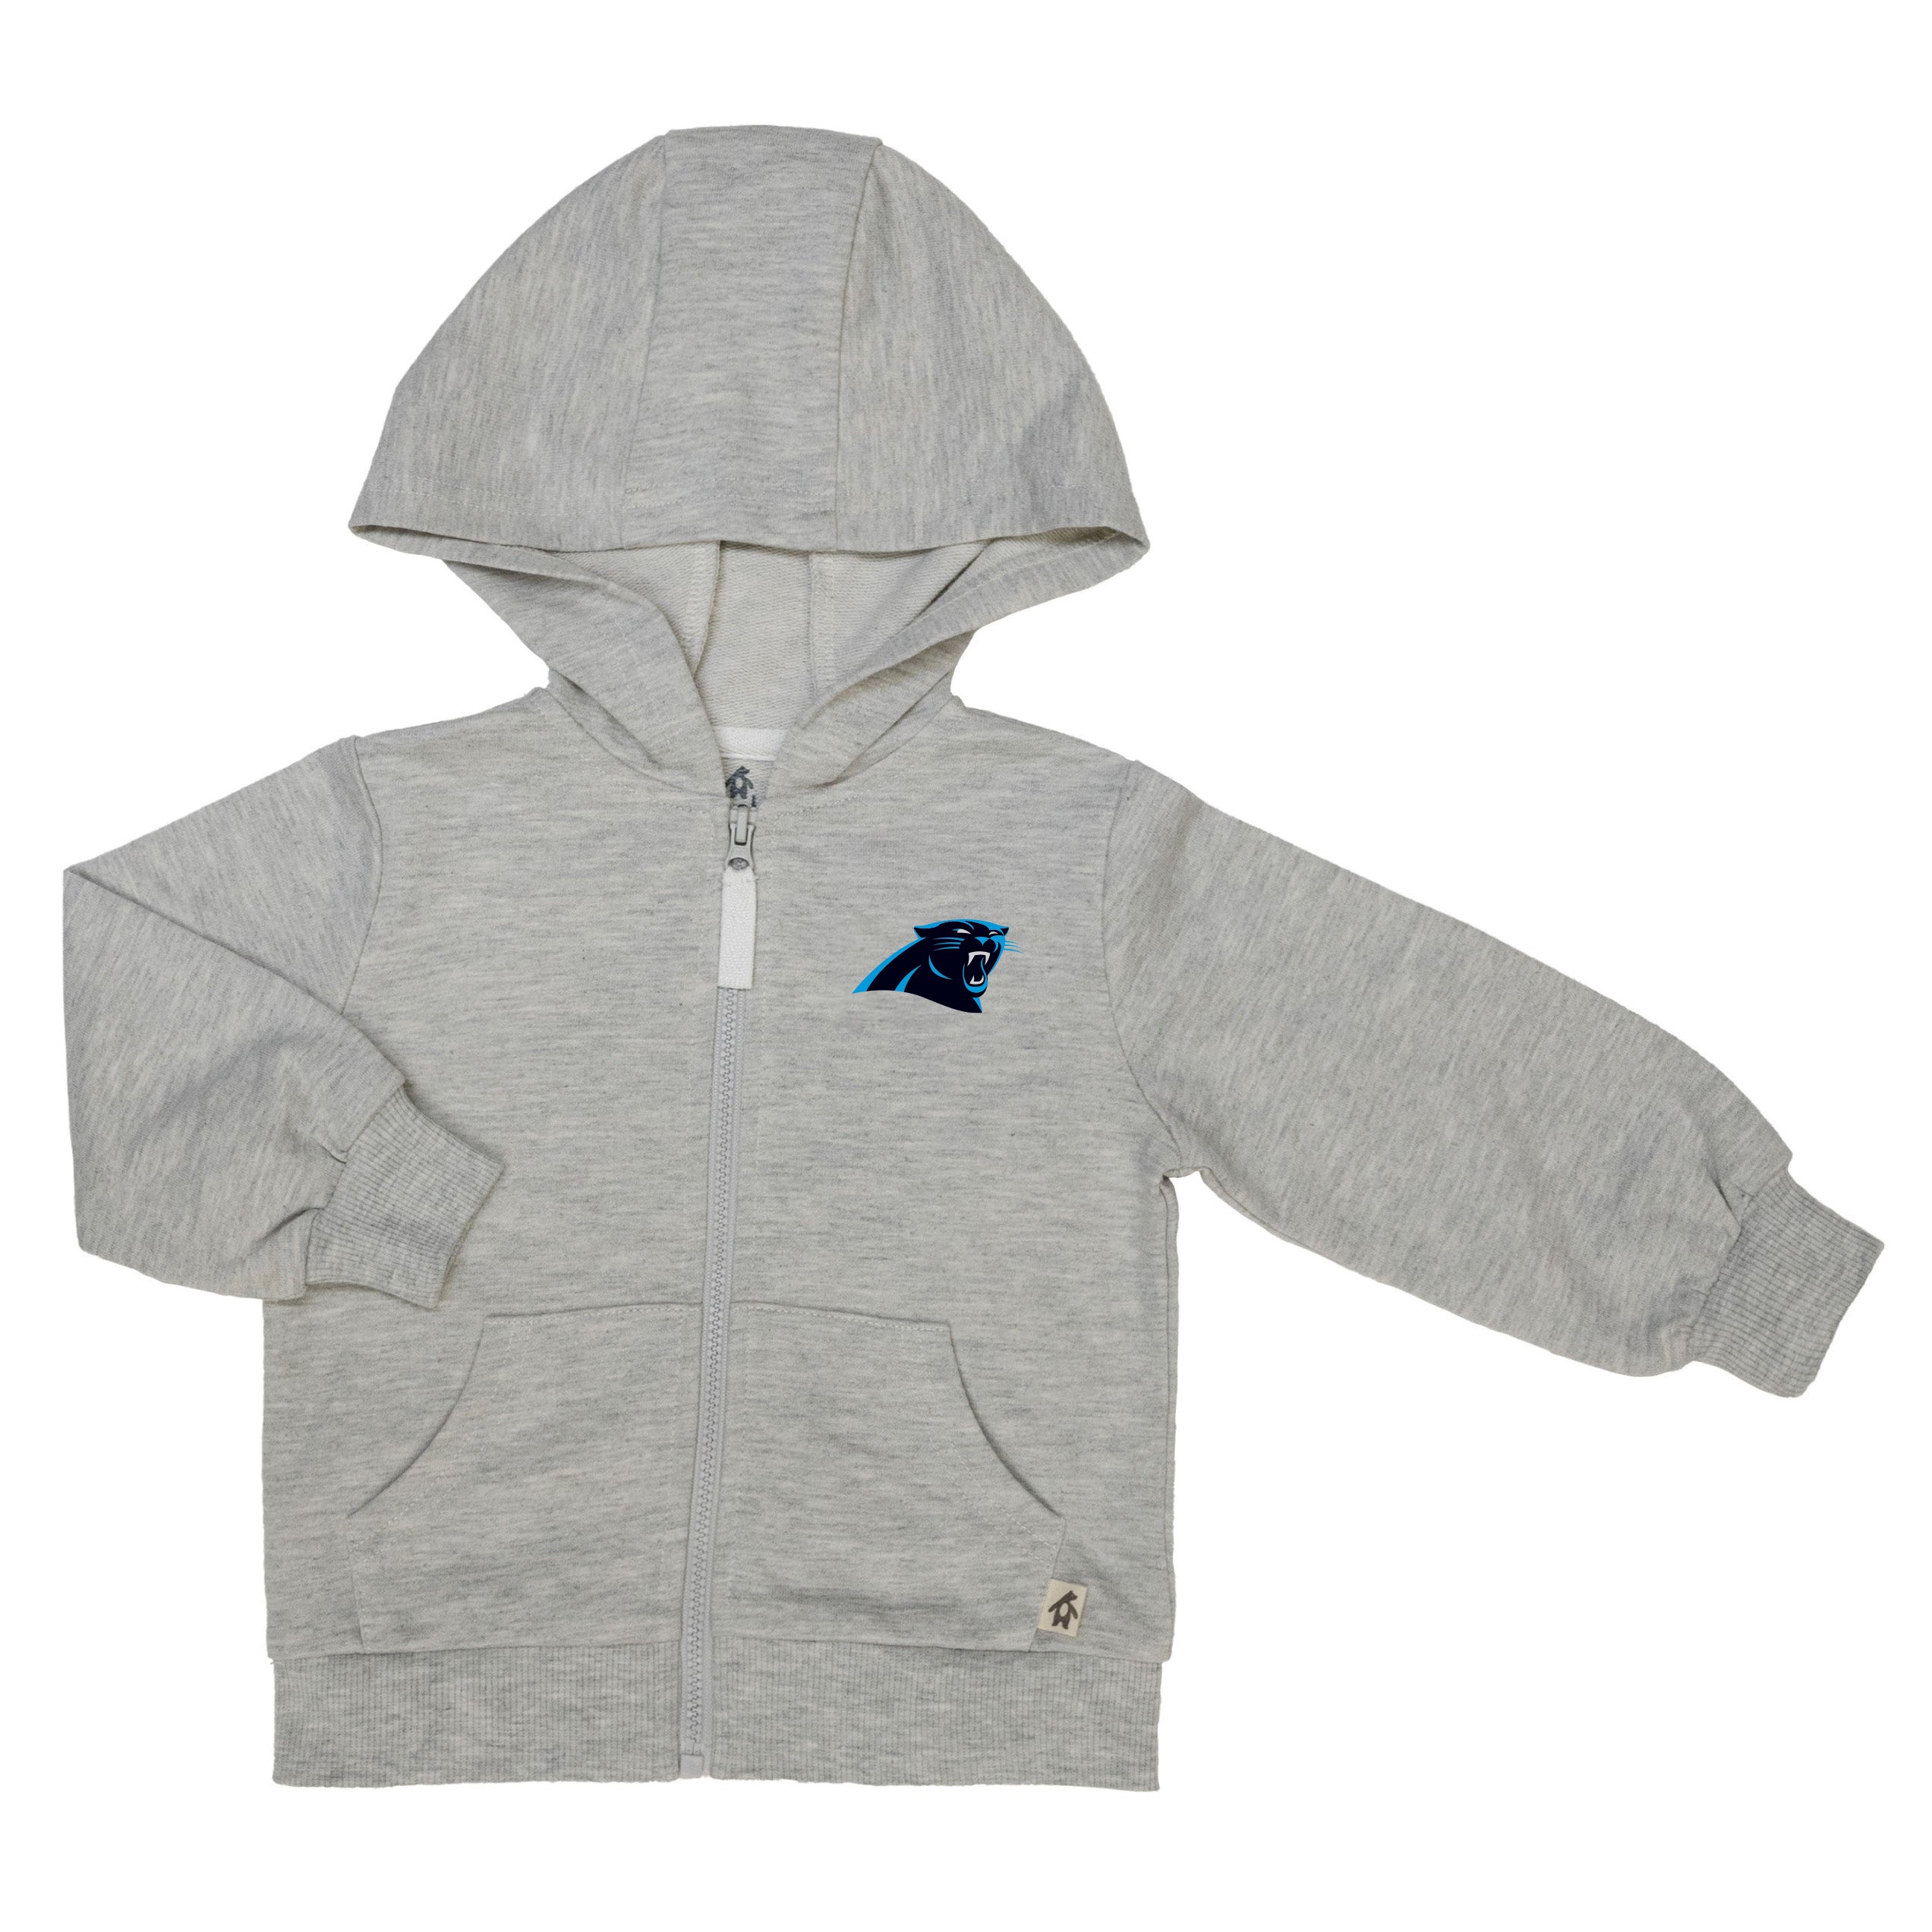 NFL Baby Grey French Terry Zip-Up Hoodie